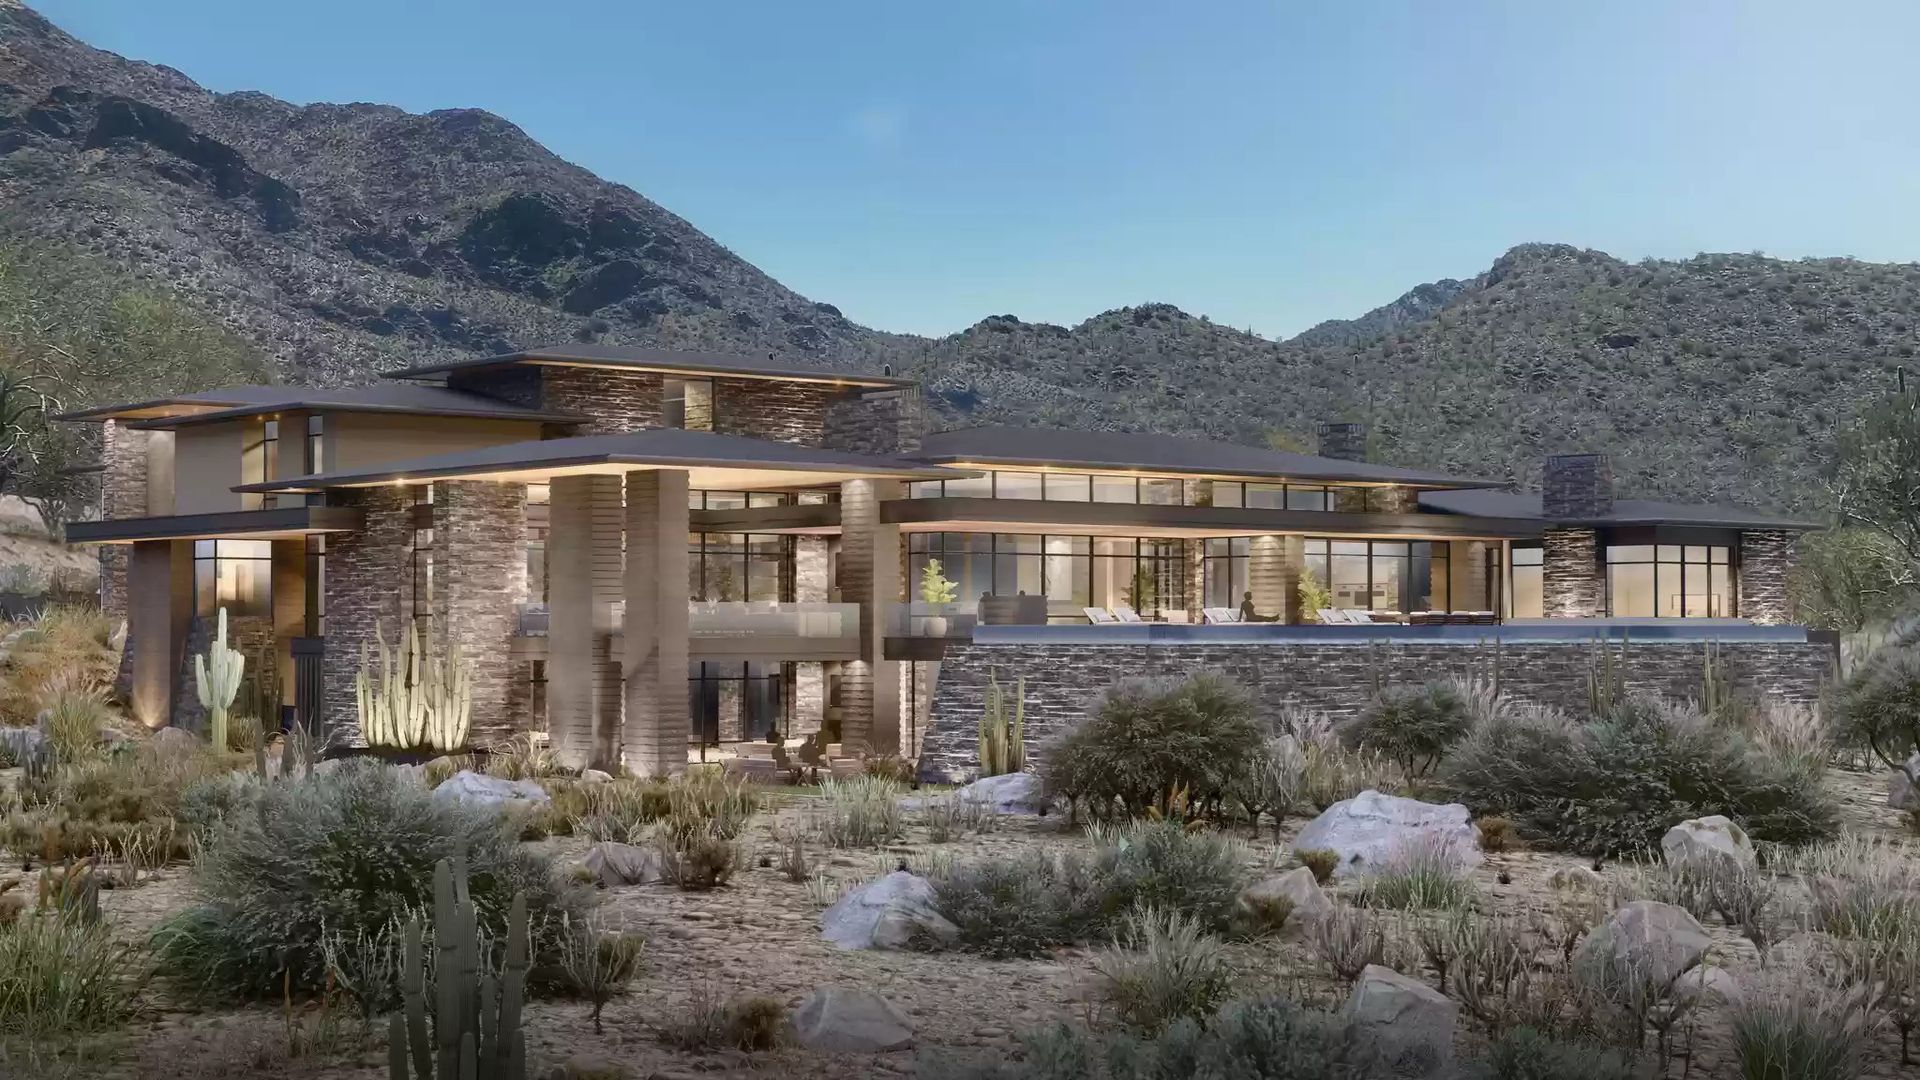 An image of a massive house in desert foothills